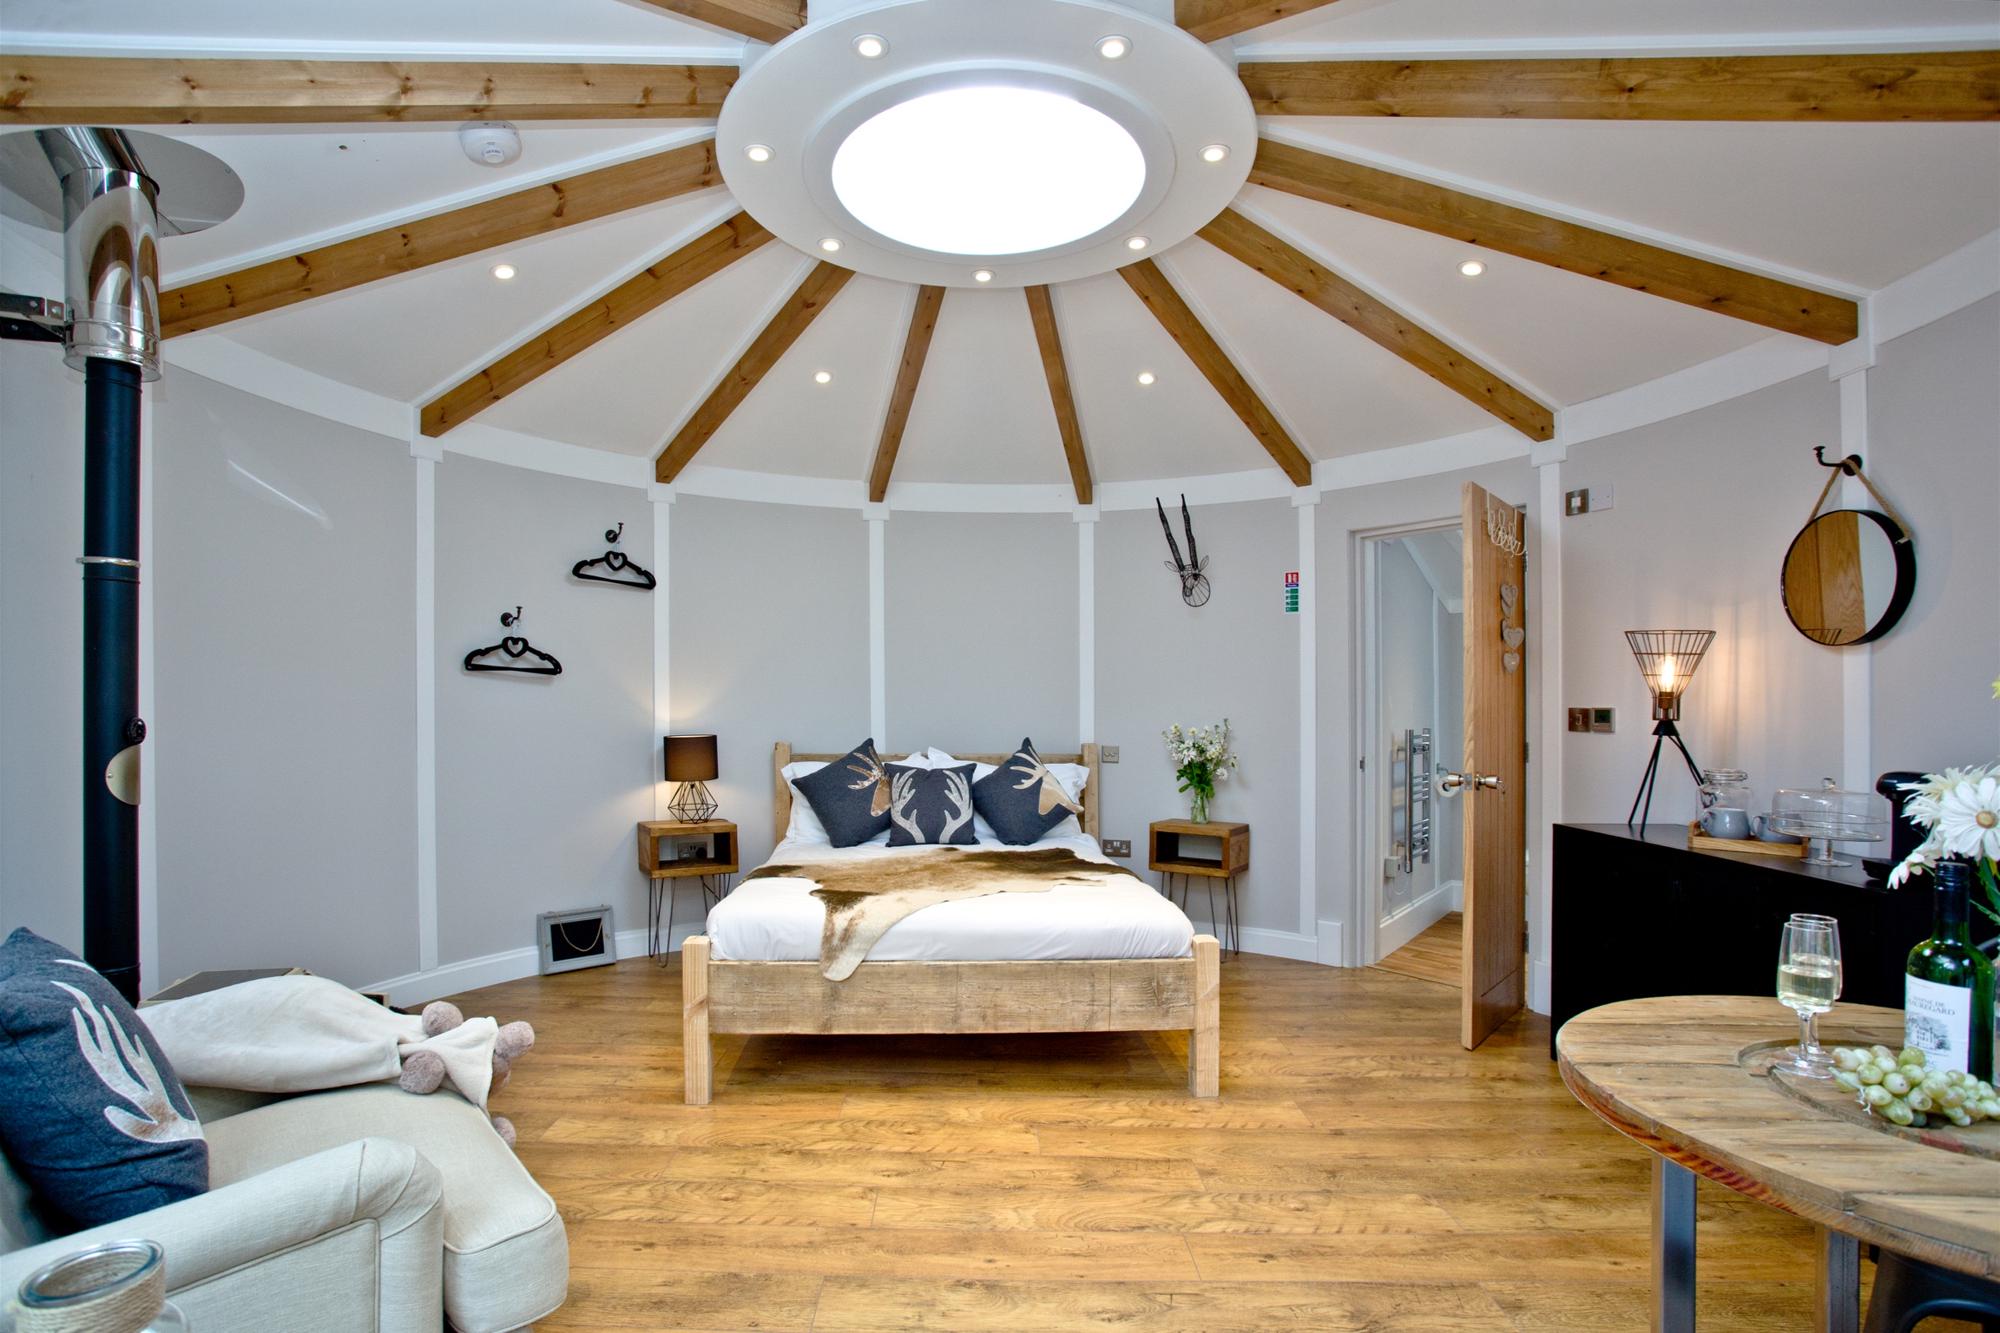 Self-Catering in Cornwall holidays at Cool Places